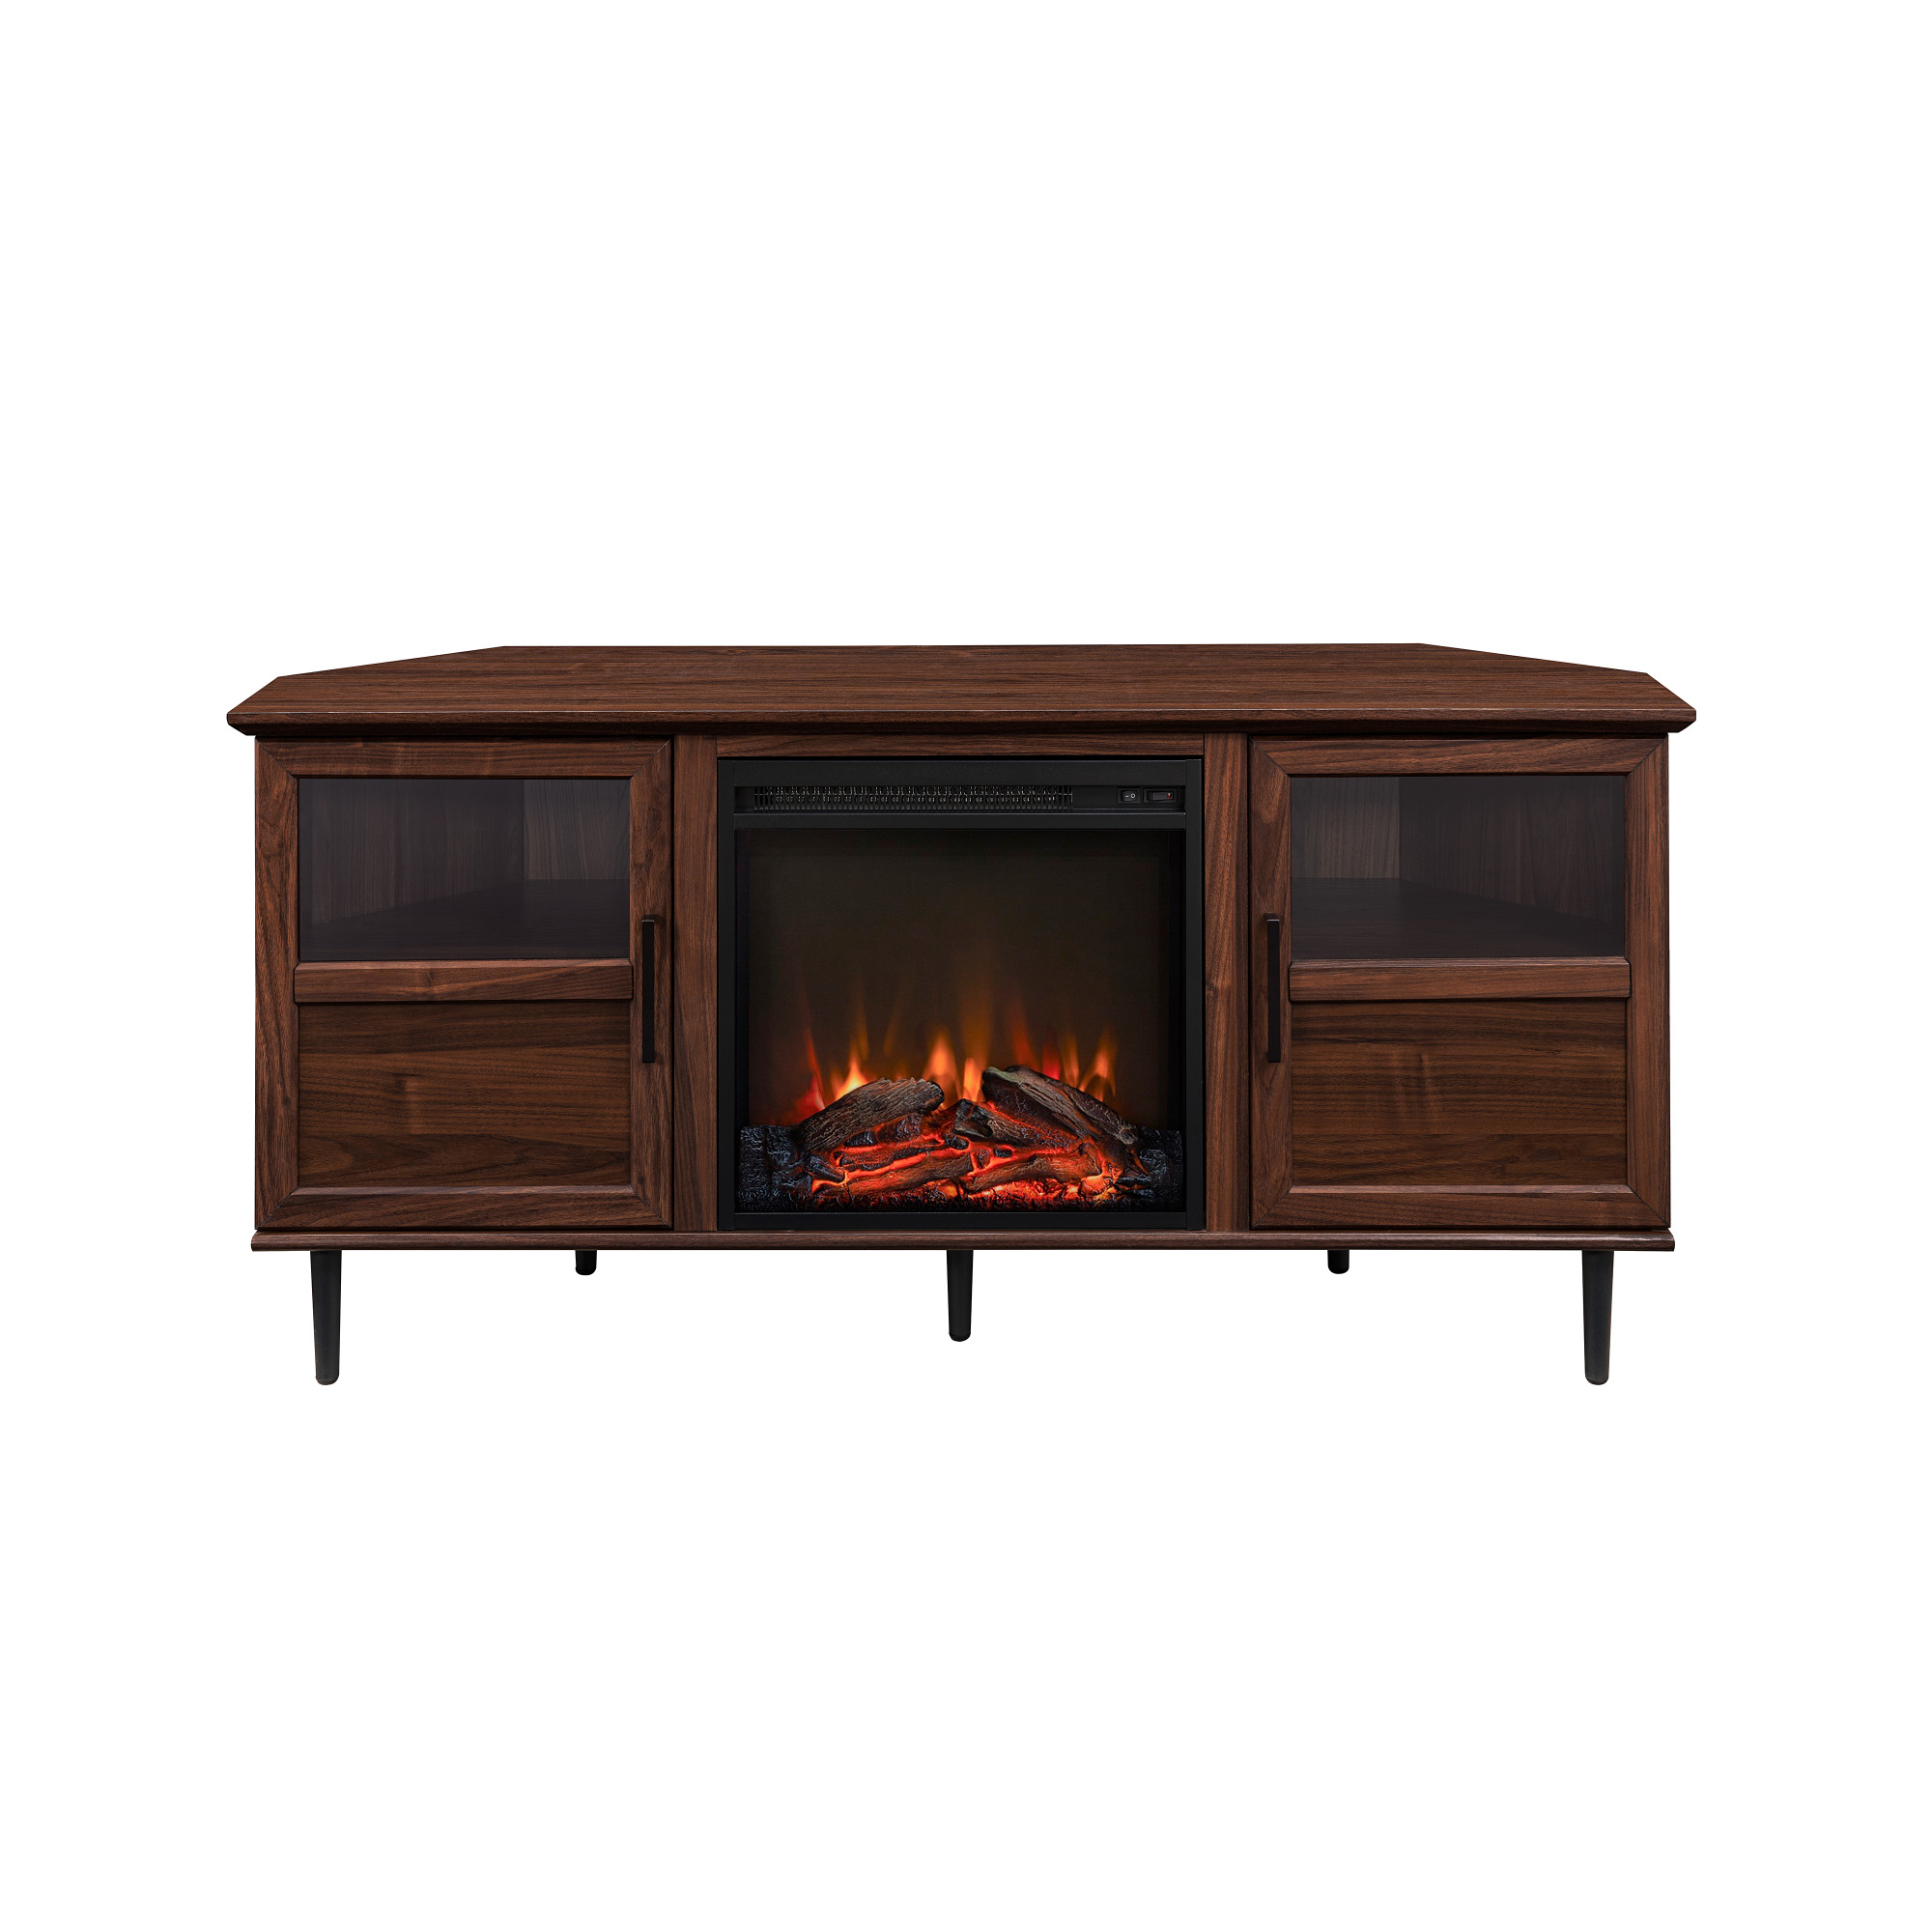 Walker Edison Panel Electric Fireplace Corner TV Stand for TVs up to 60”, Dark Walnut - image 4 of 11